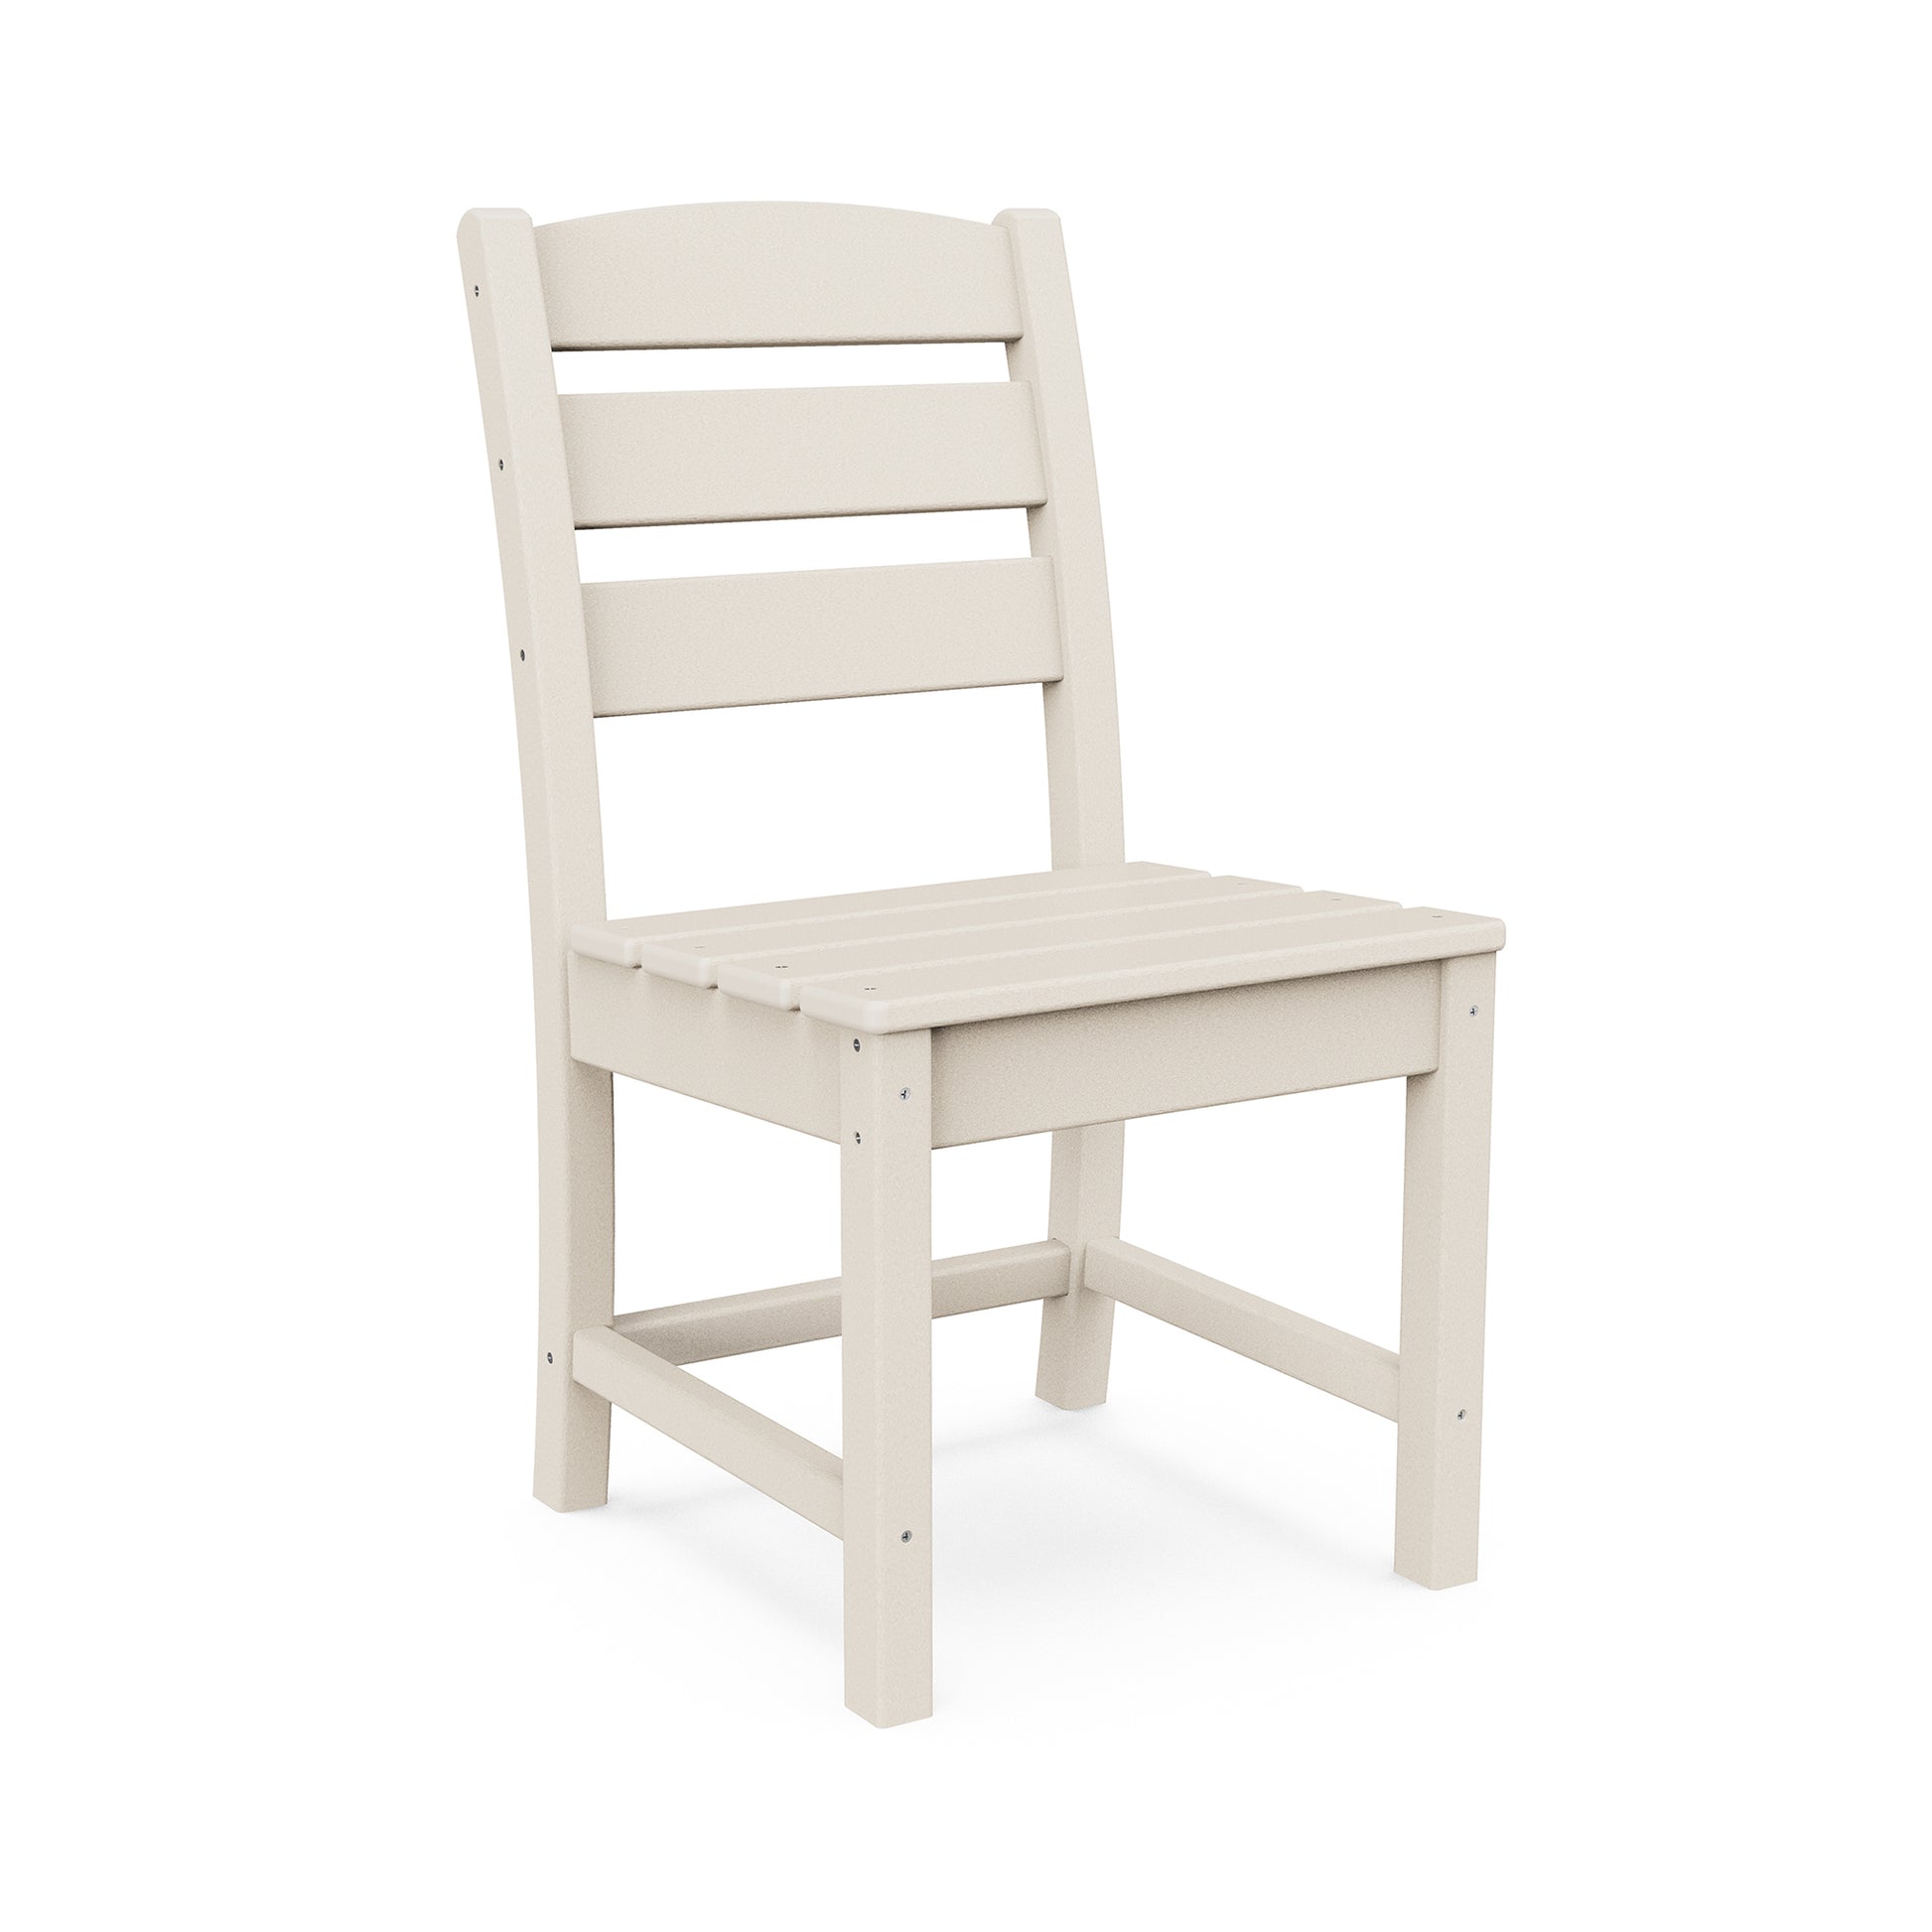 A simple, modern off-white POLYWOOD® Lakeside Dining Side Chair with a slatted back and a solid seat, set against a plain white background.